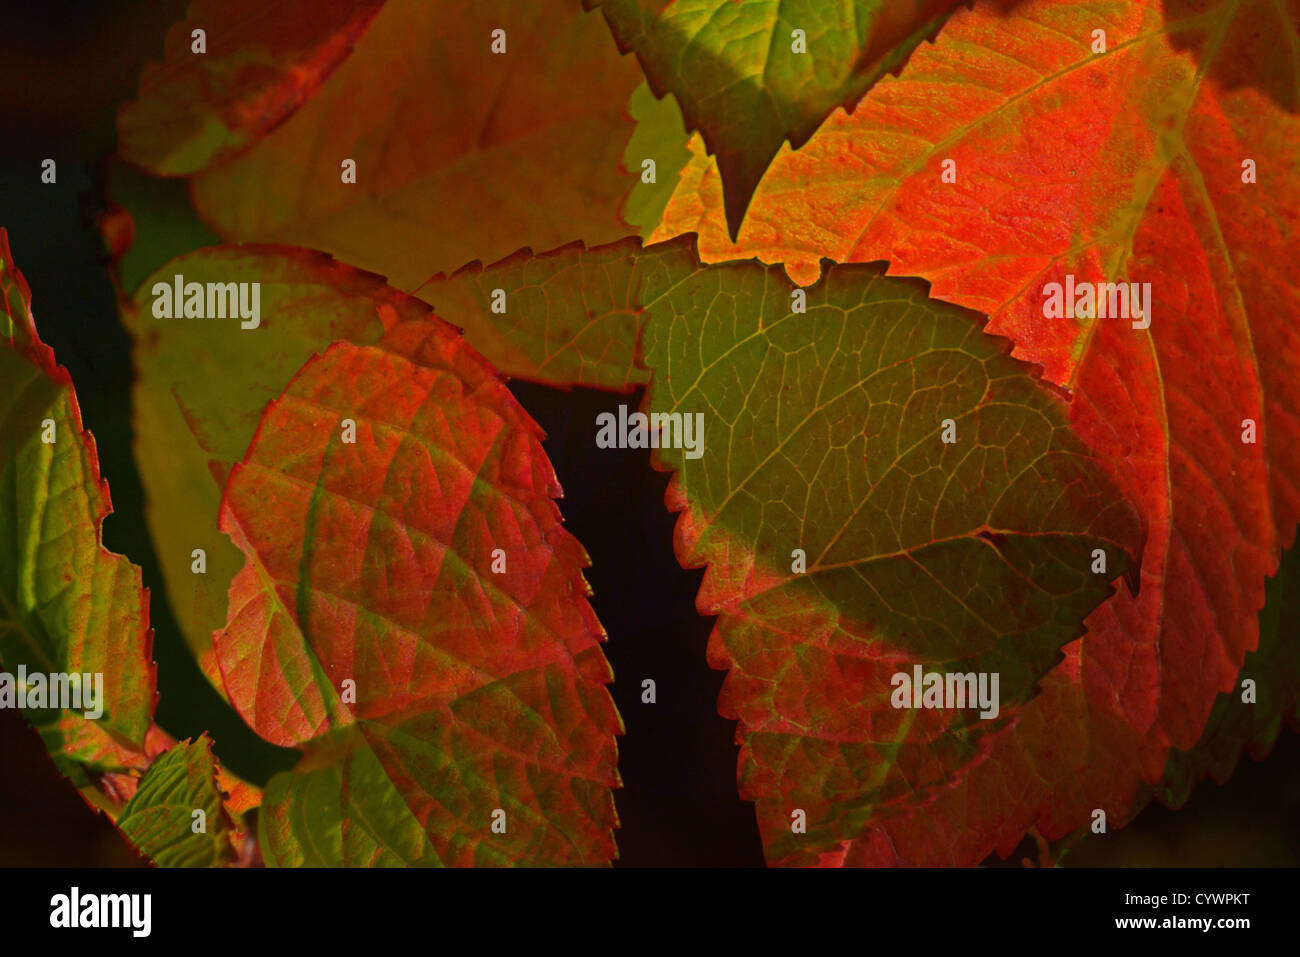 A composite image representing Autumn of Fall Stock Photo